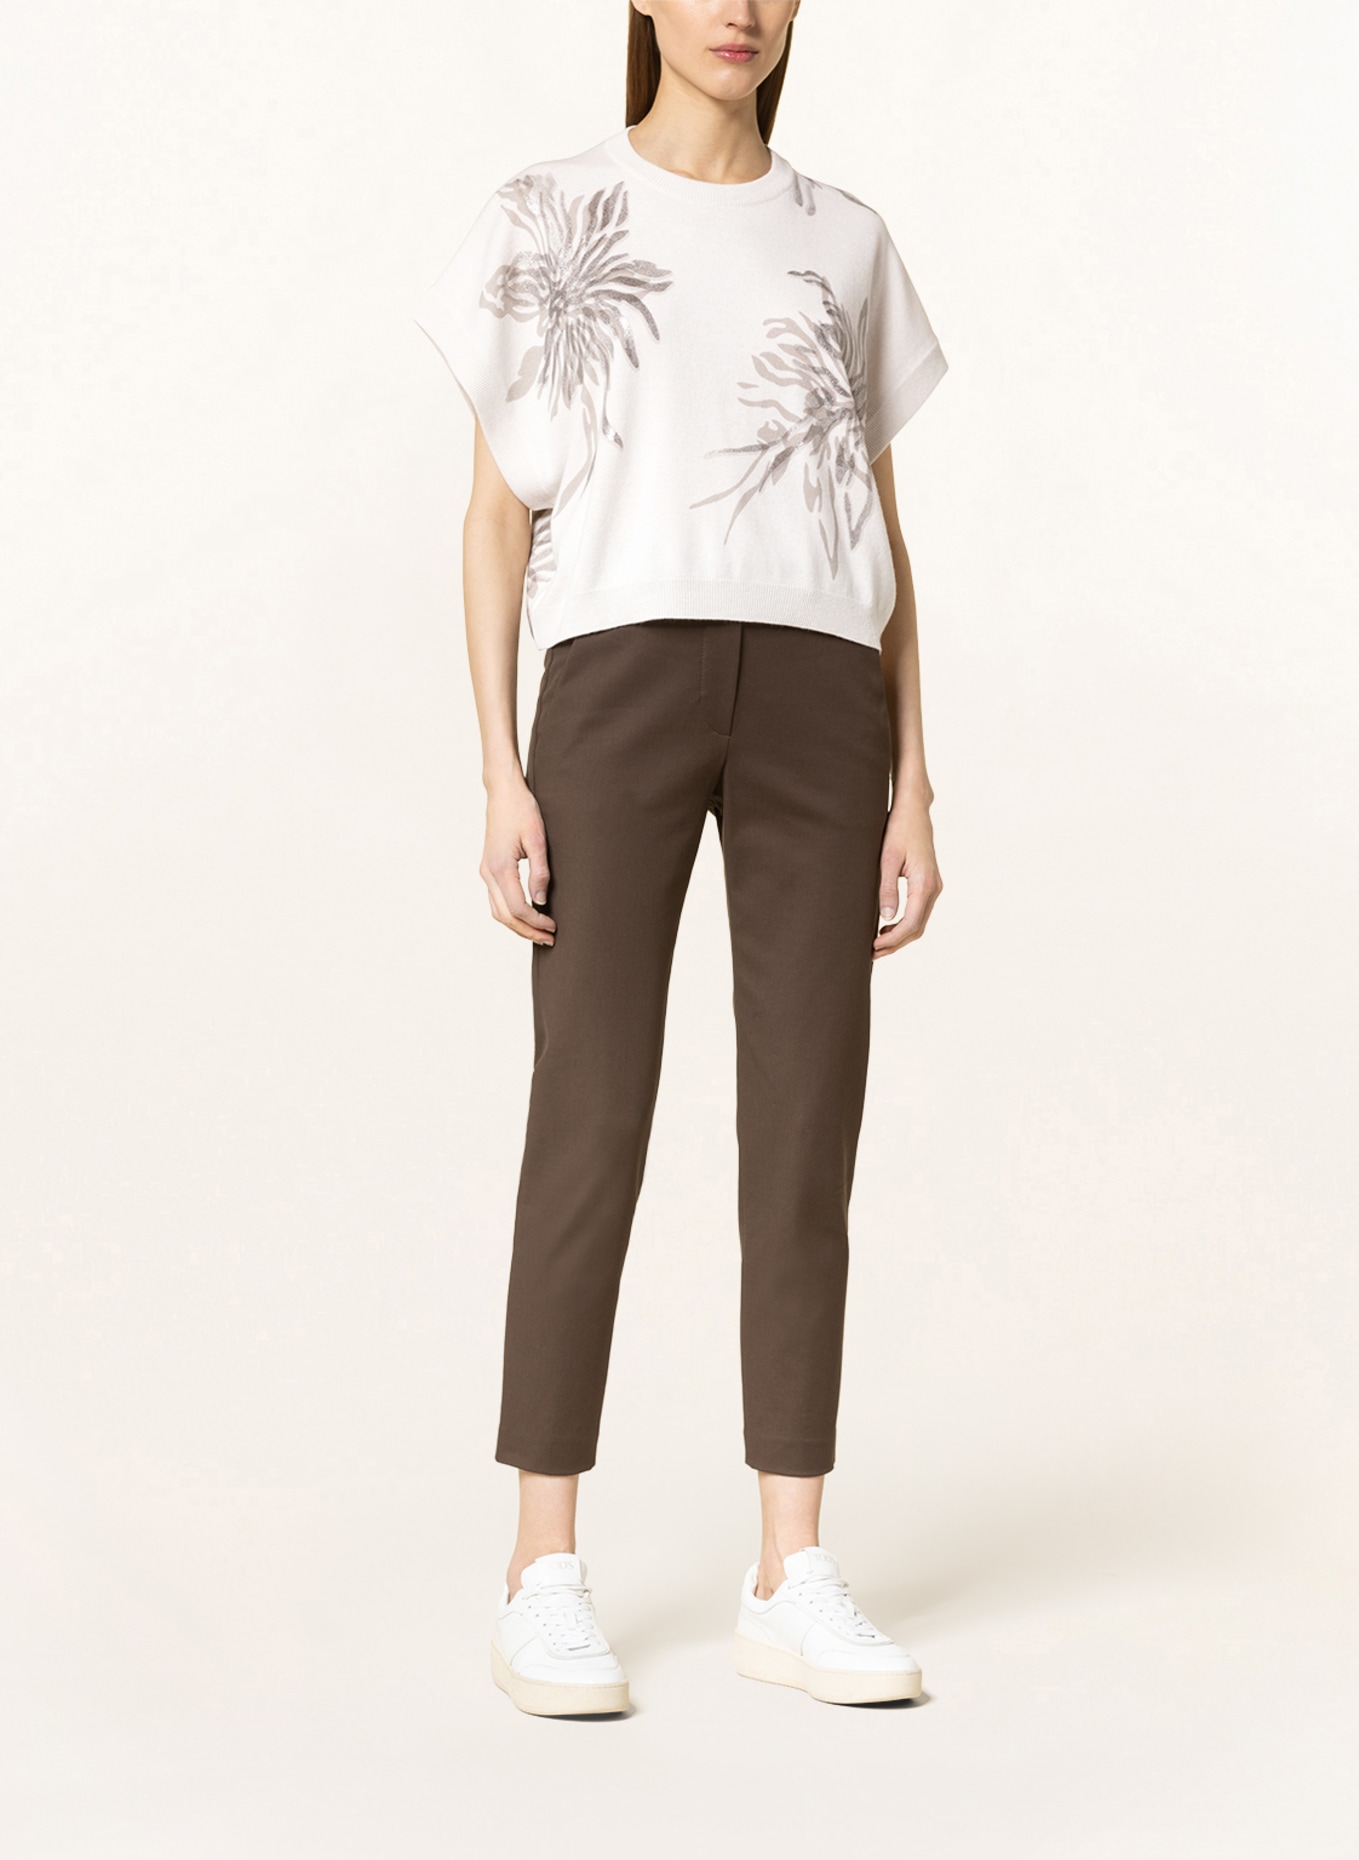 BRUNELLO CUCINELLI Knit shirt with cashmere, Color: CREAM/ TAUPE/ SILVER (Image 2)